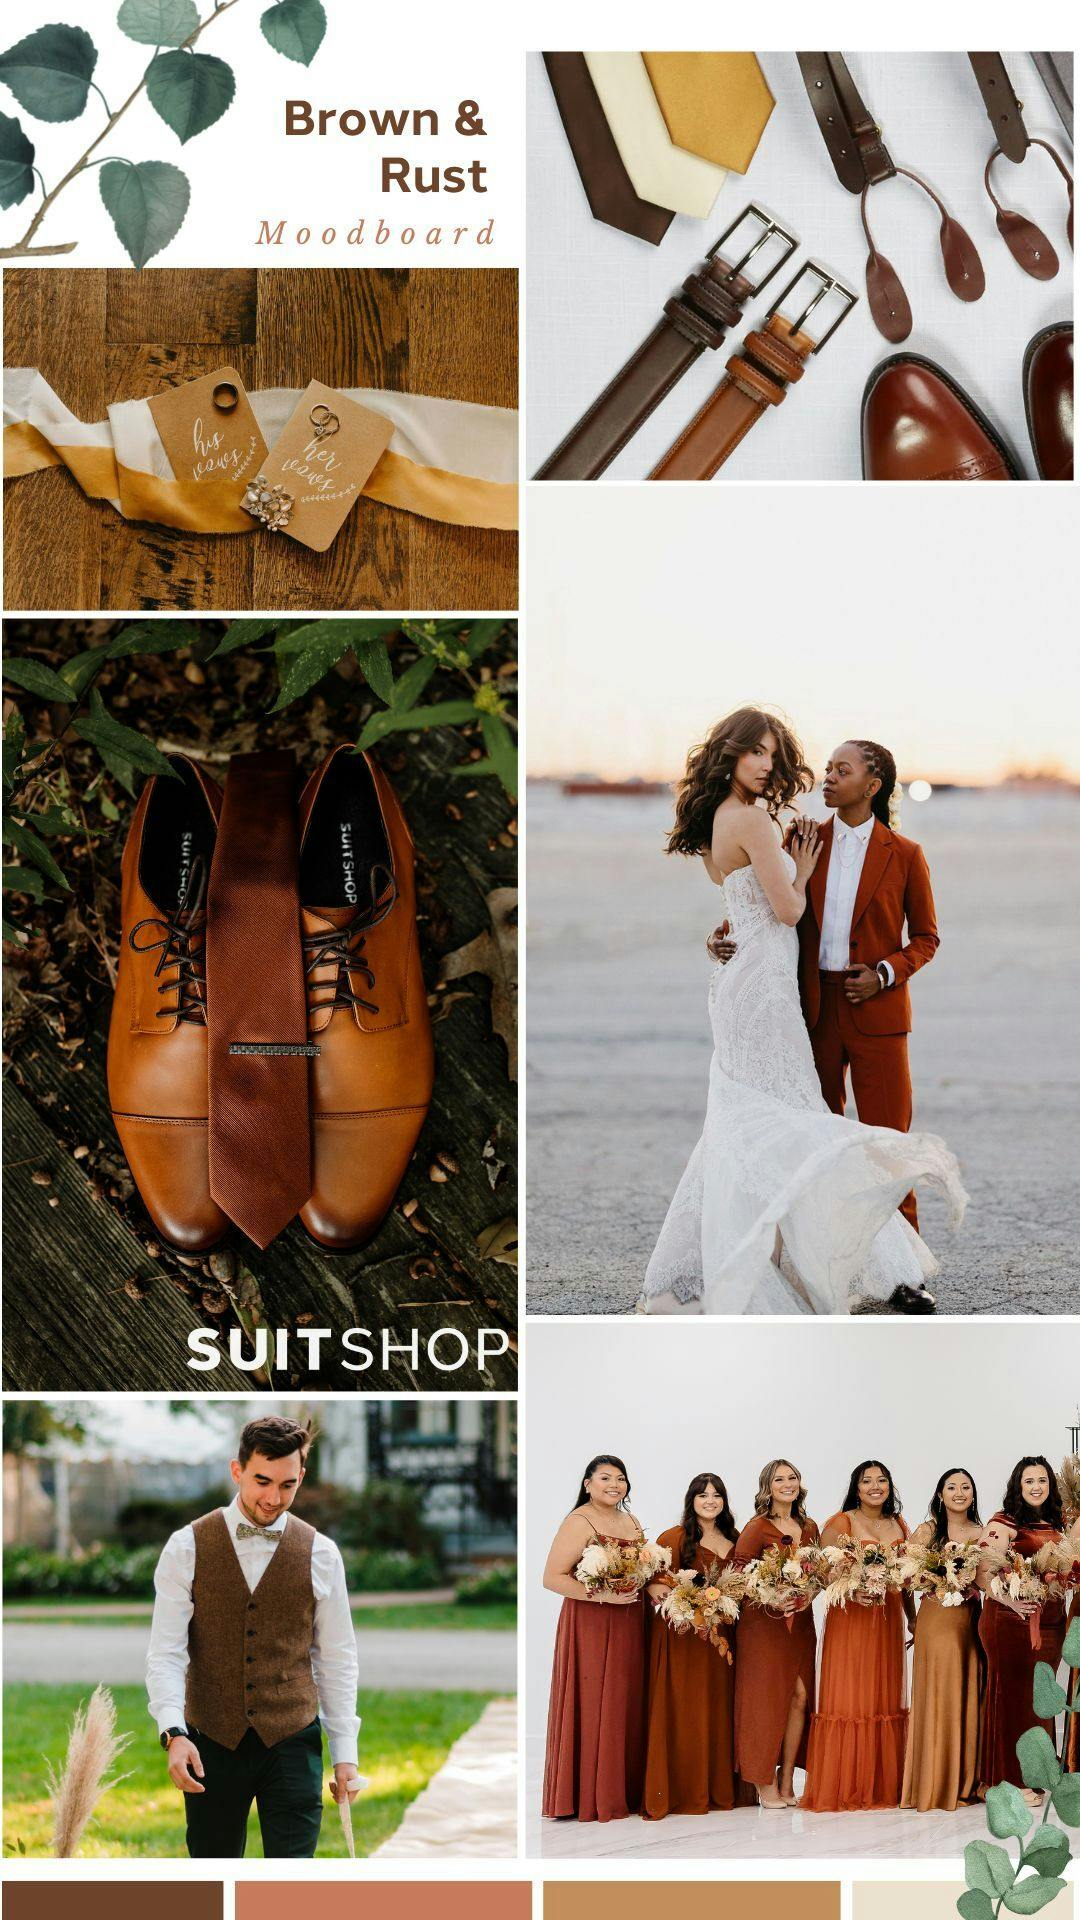 Earthy, relaxing wedding color palette for summer with tweed suit vests, burnt orange suits, brown shoes, and rust bridesmaid dresses.